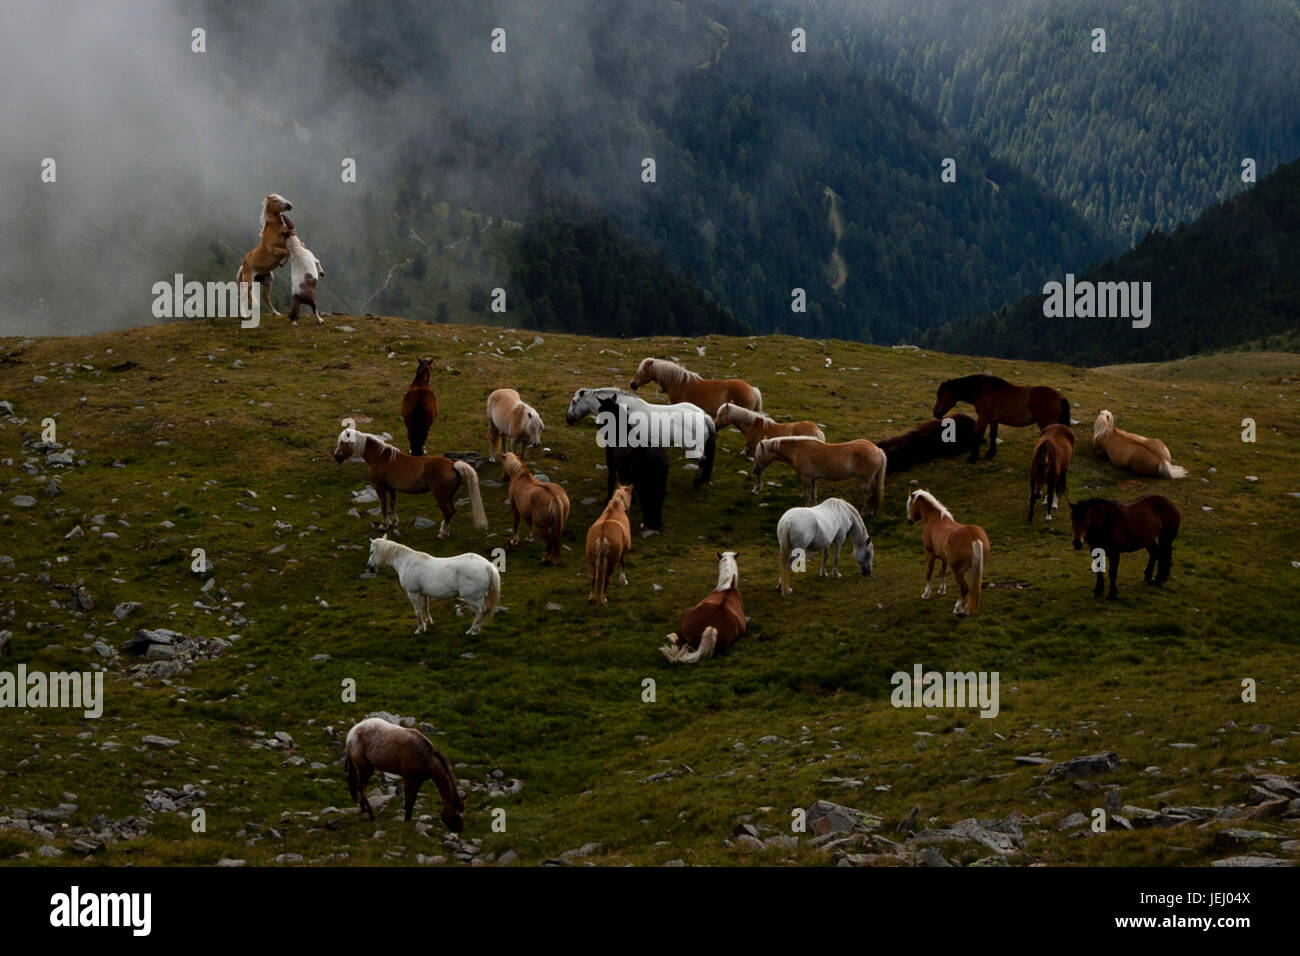 Rearing up at the Abyss. Two horses fighting near Flock of horses on a meadow in the Alps Stock Photo